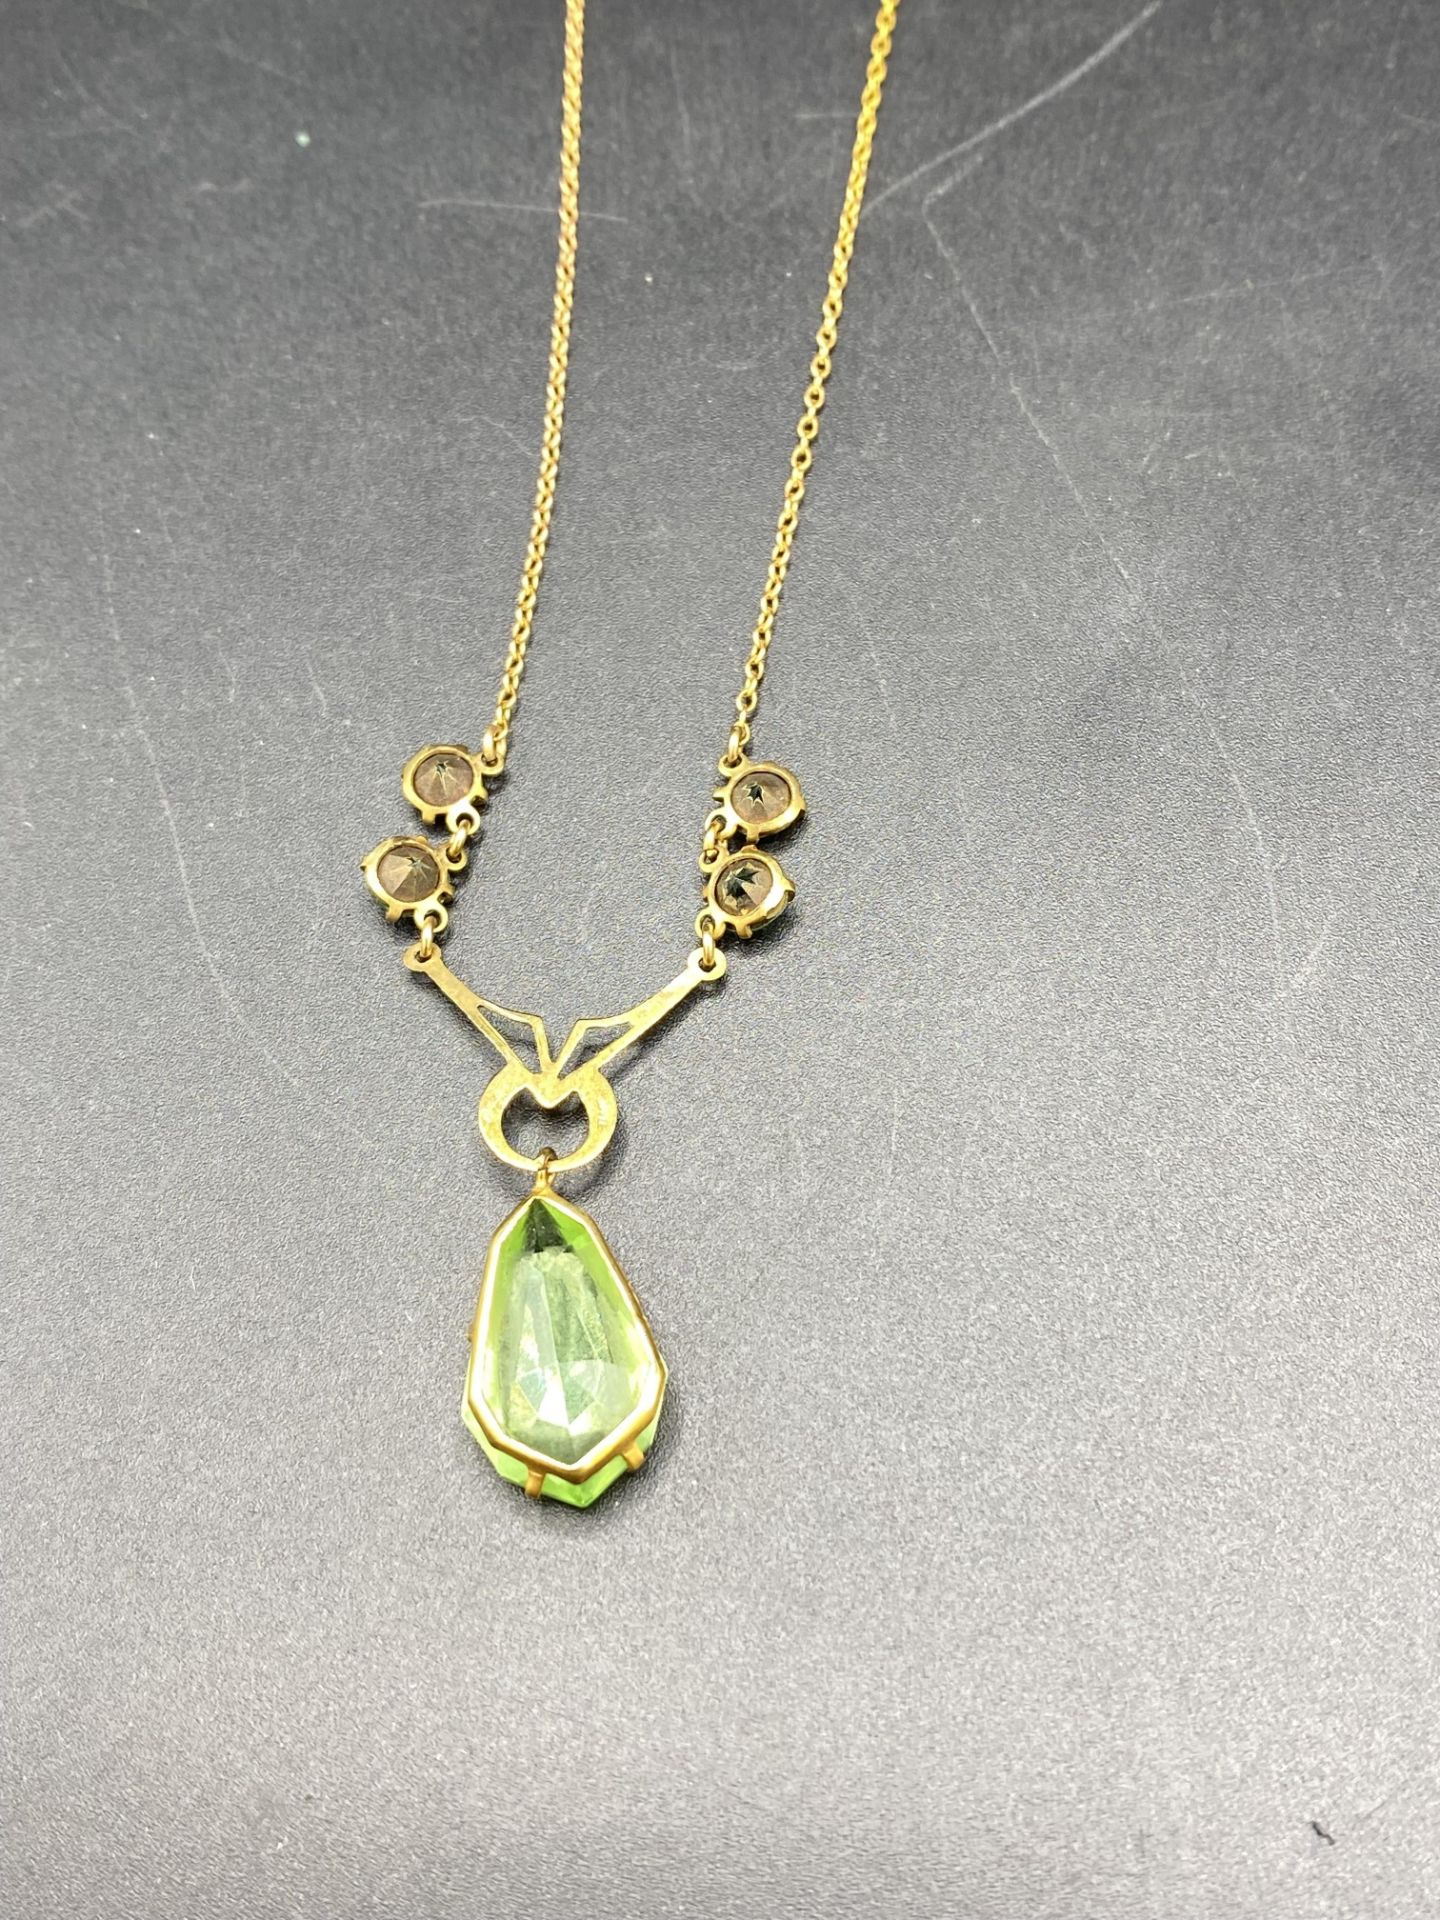 9ct gold necklace set with a pale green teardrop and a 9ct gold diamond set locket - Image 6 of 7